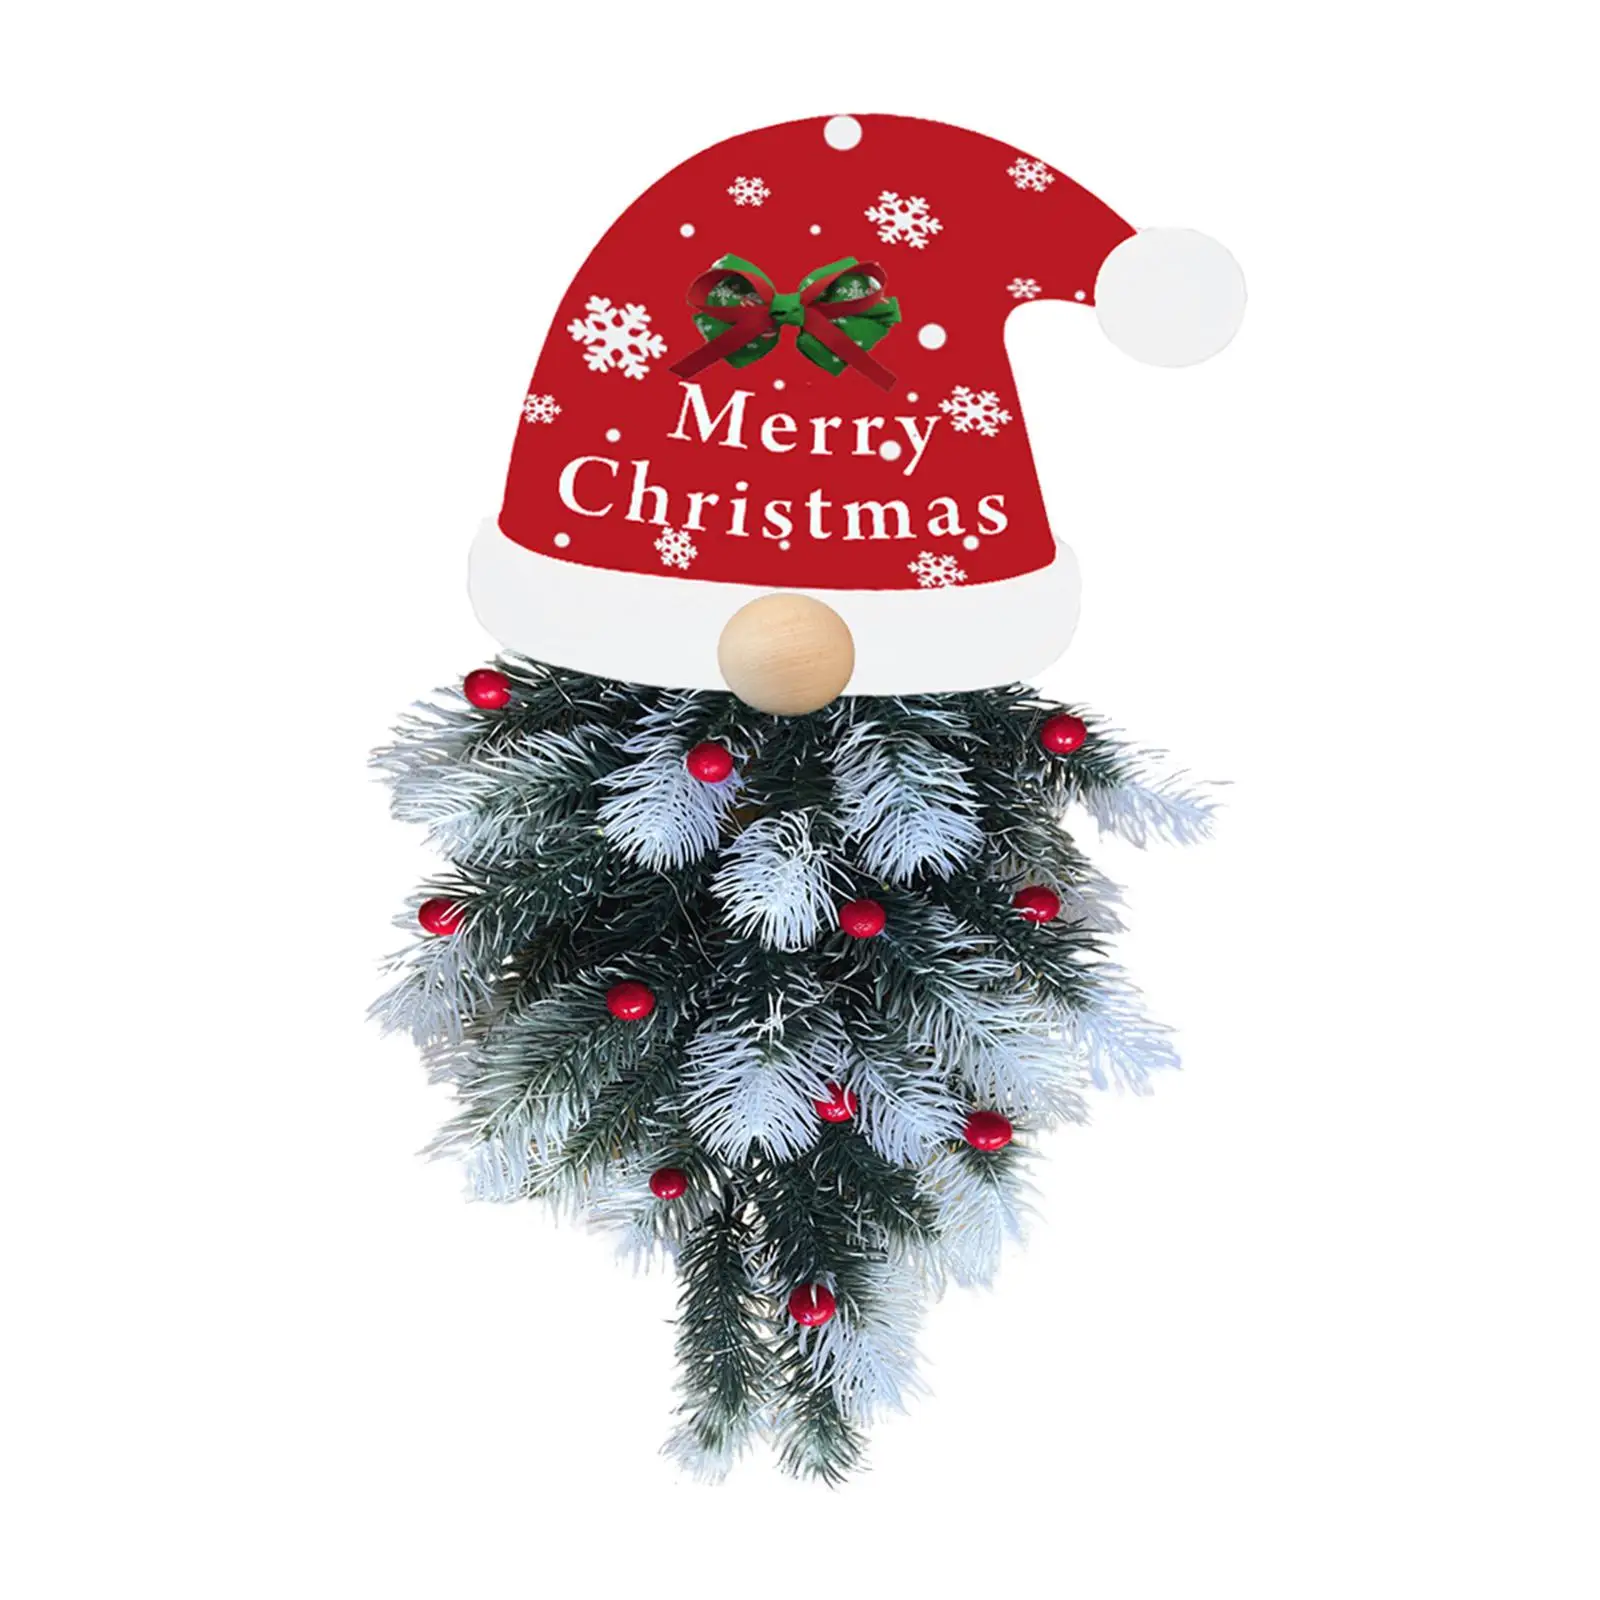 Artificial Christmas Swag Christmas Decoration Ornament for Windows Walls